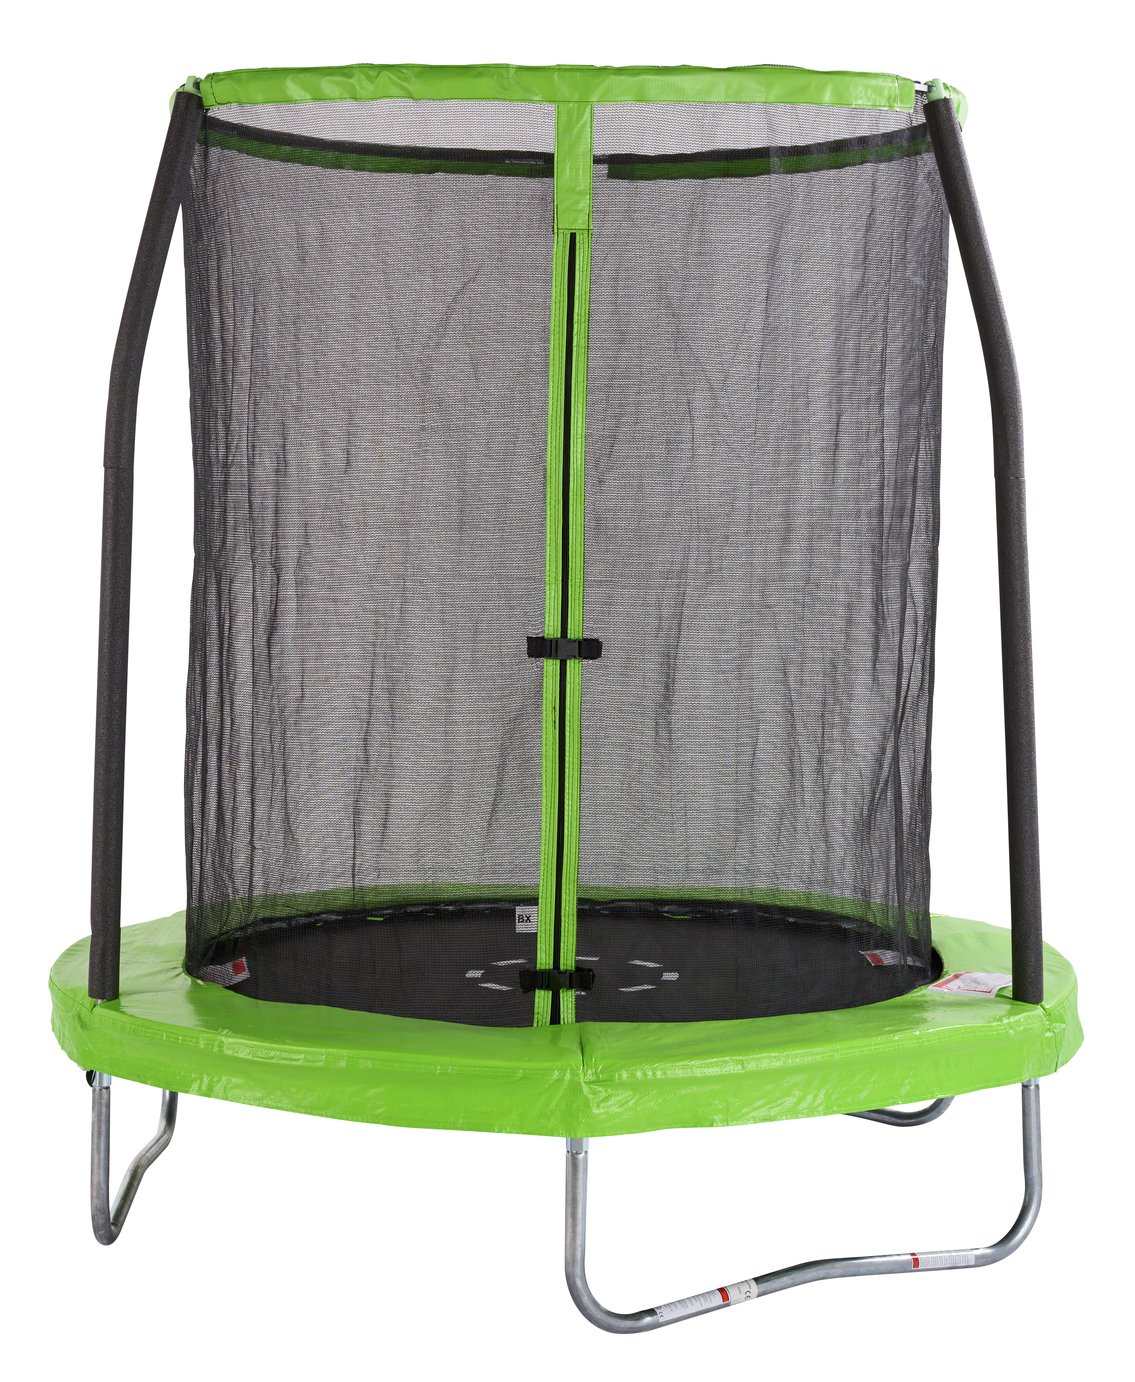 Chad Valley 6ft Outdoor Kids Trampoline with Enclosure review